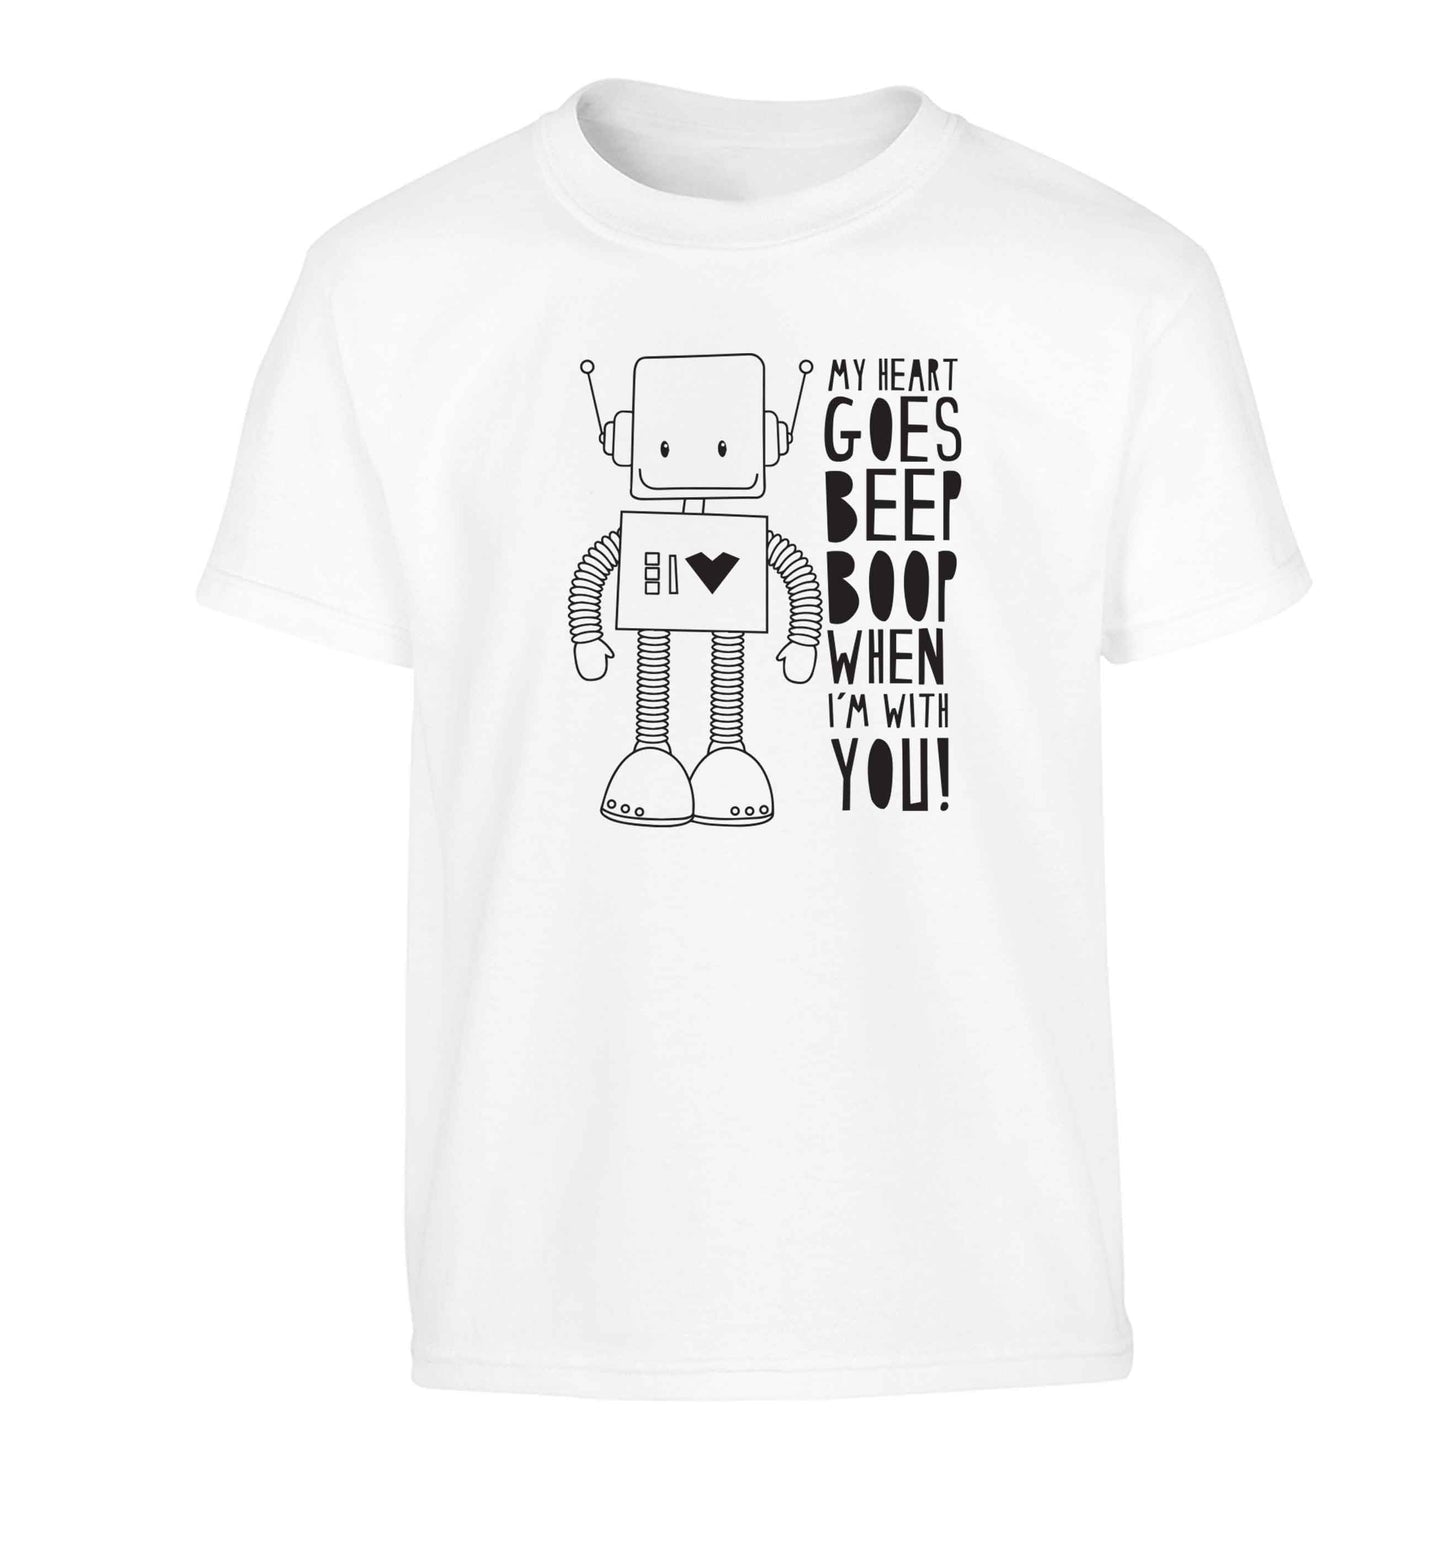 My heart goes beep boop when I'm with you Children's white Tshirt 12-13 Years